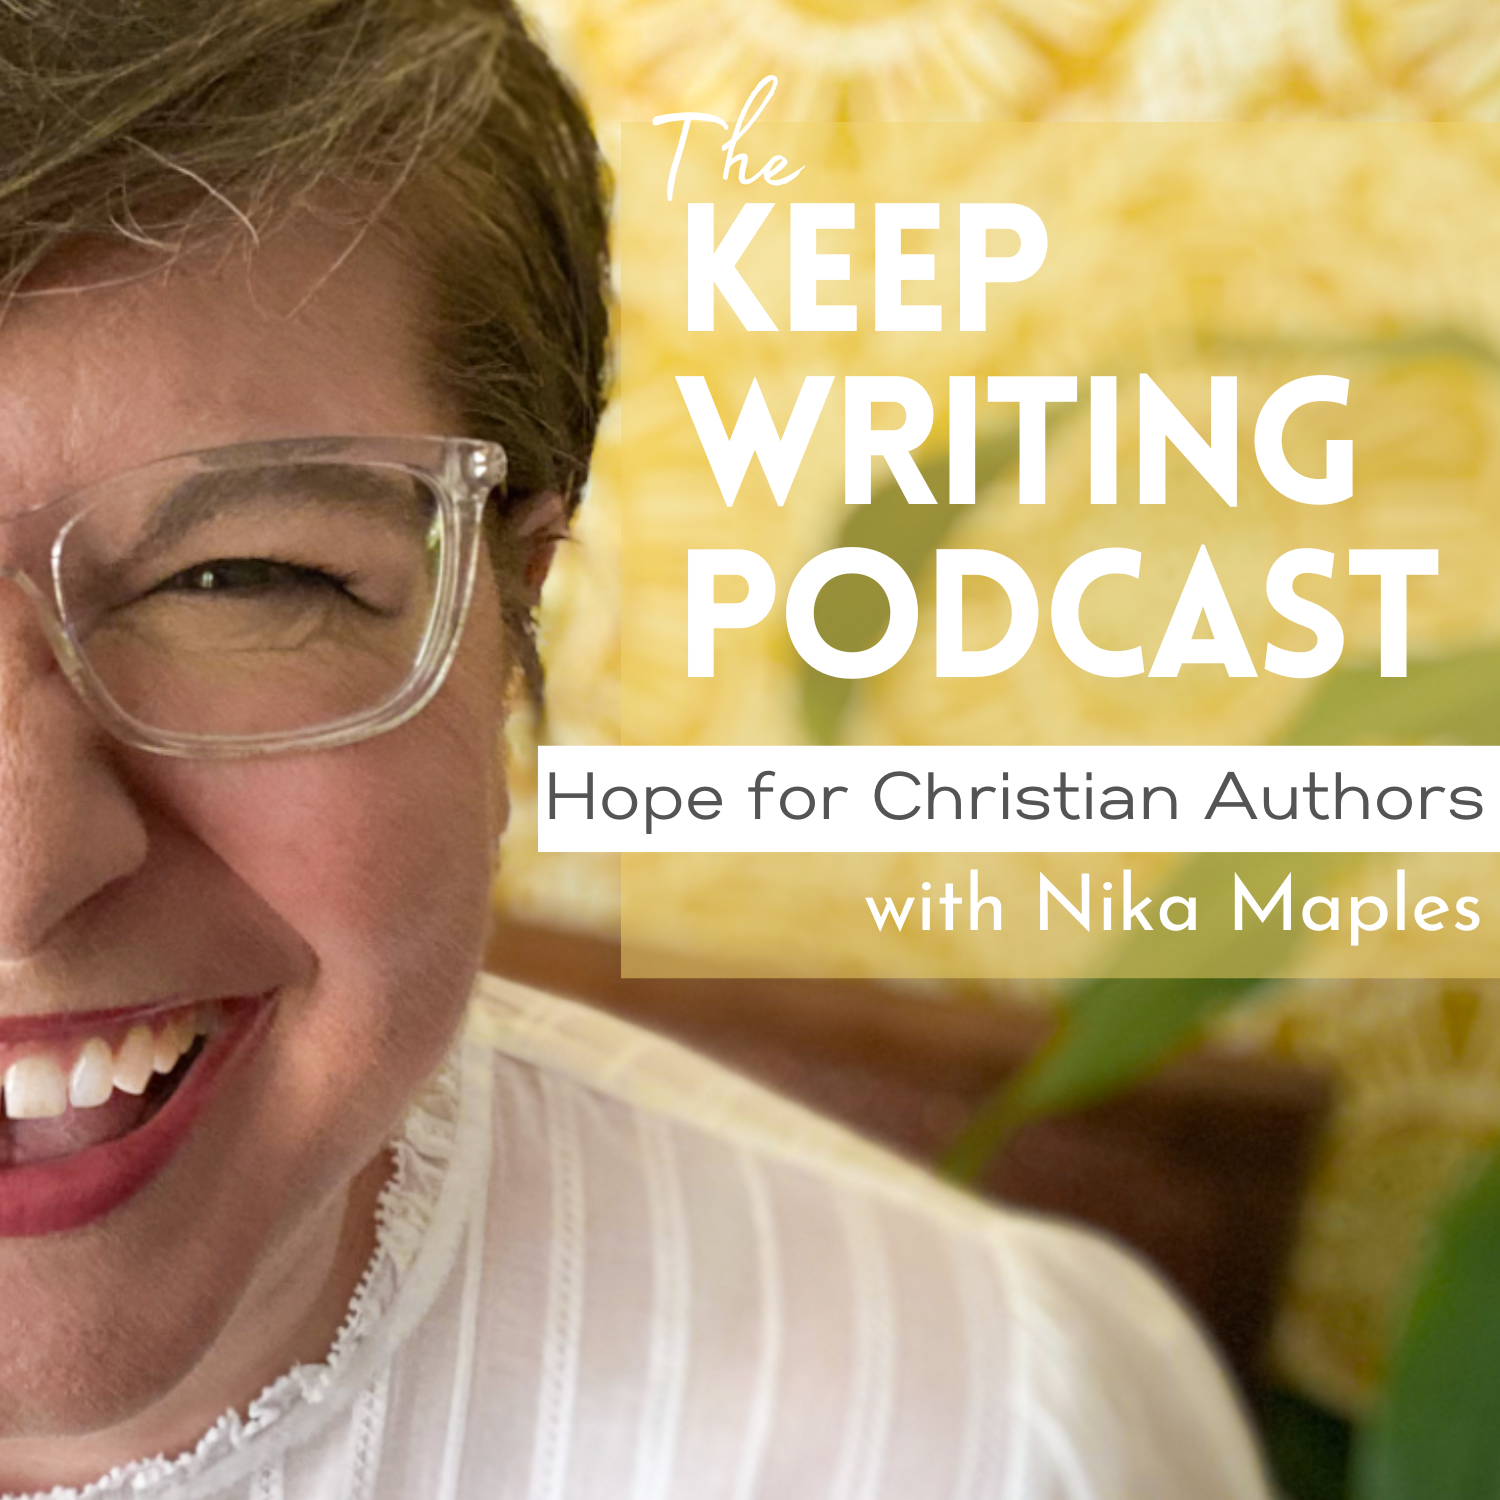 The Keep Writing Podcast